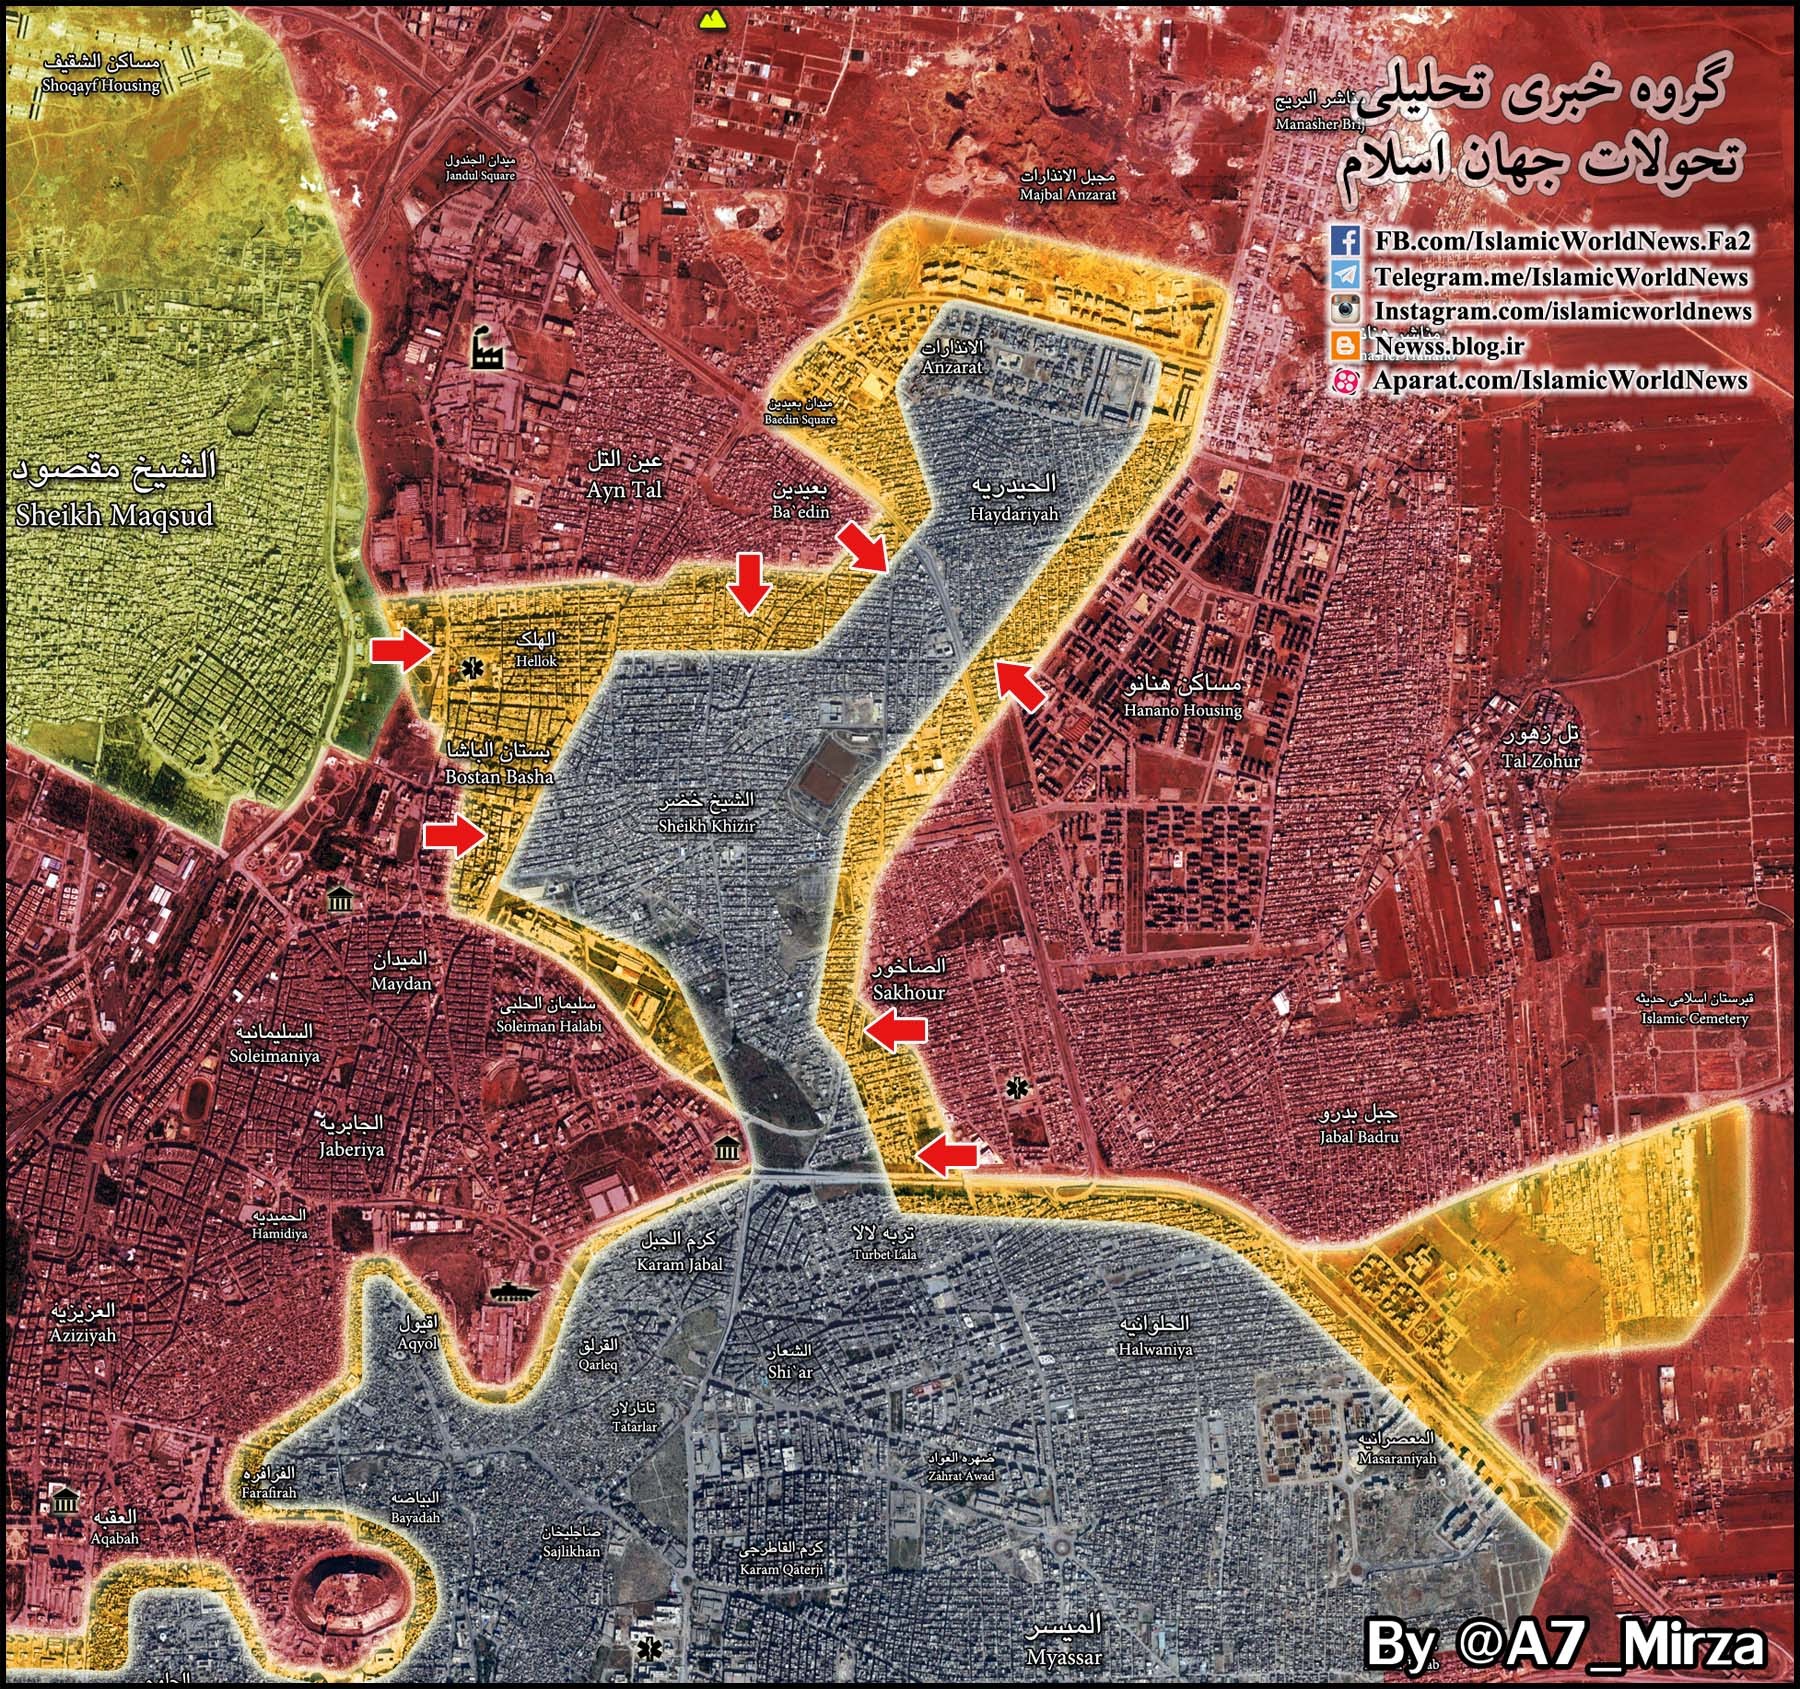 Syria Map Update: Military Situation in Aleppo City on November 27, 2016